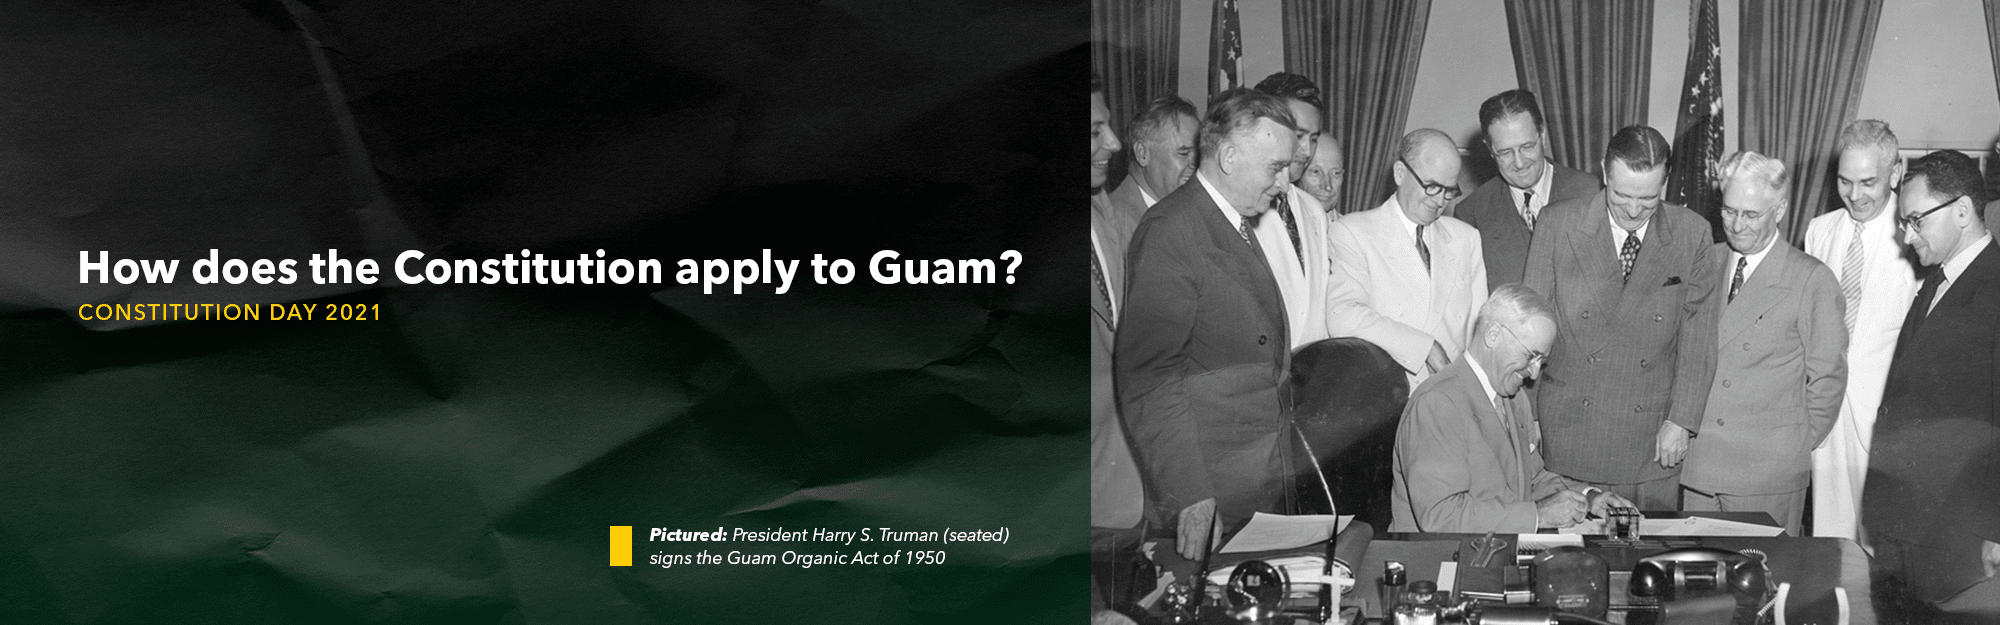 Graphic that says "How does the Constitution apply to Guam?"